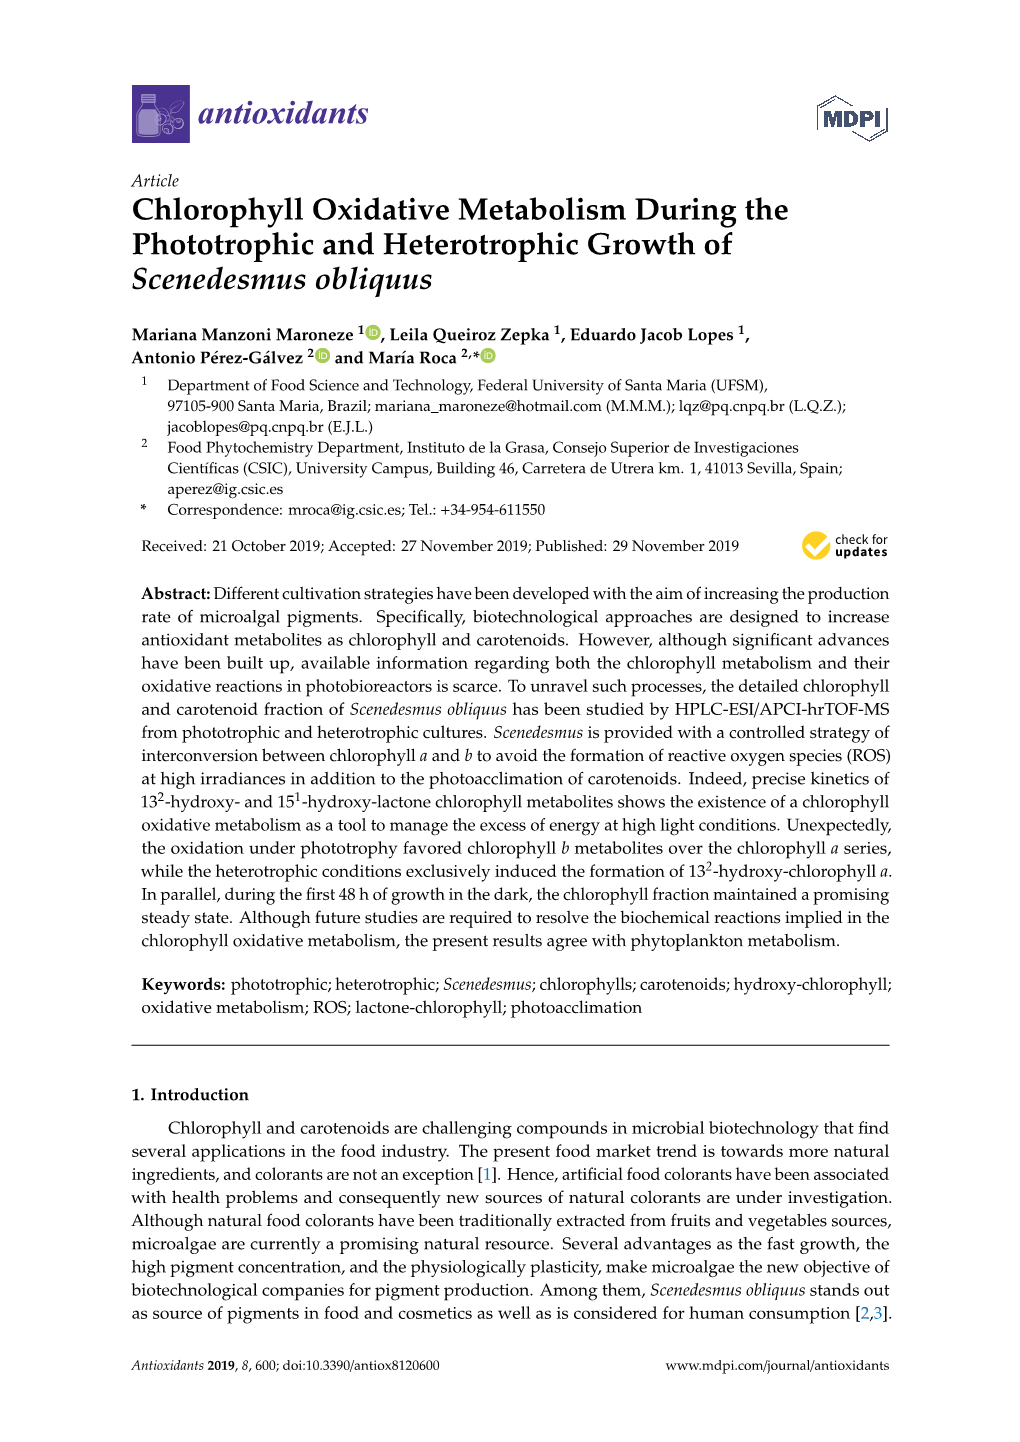 Chlorophyll Oxidative Metabolism During the Phototrophic and Heterotrophic Growth of Scenedesmus Obliquus